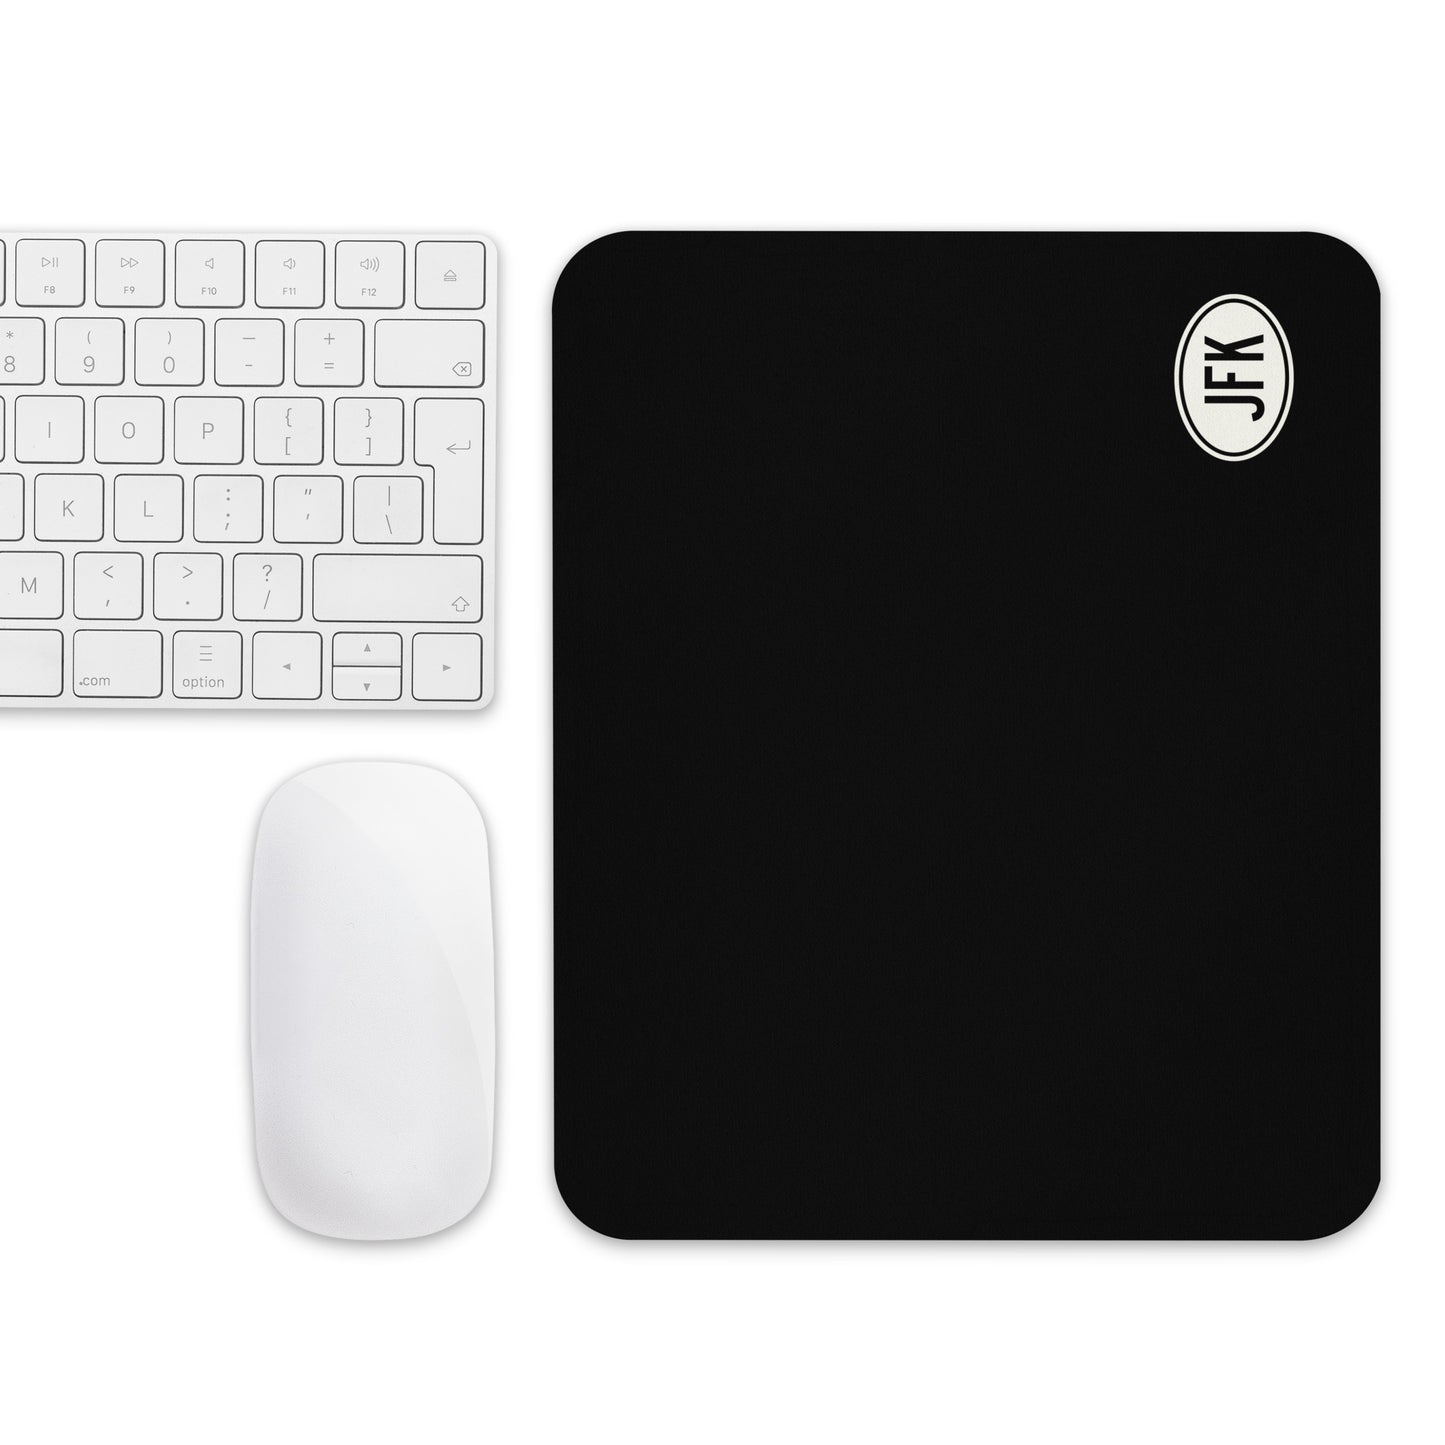 Unique Travel Gift Mouse Pad - White Oval • JFK New York City • YHM Designs - Image 04